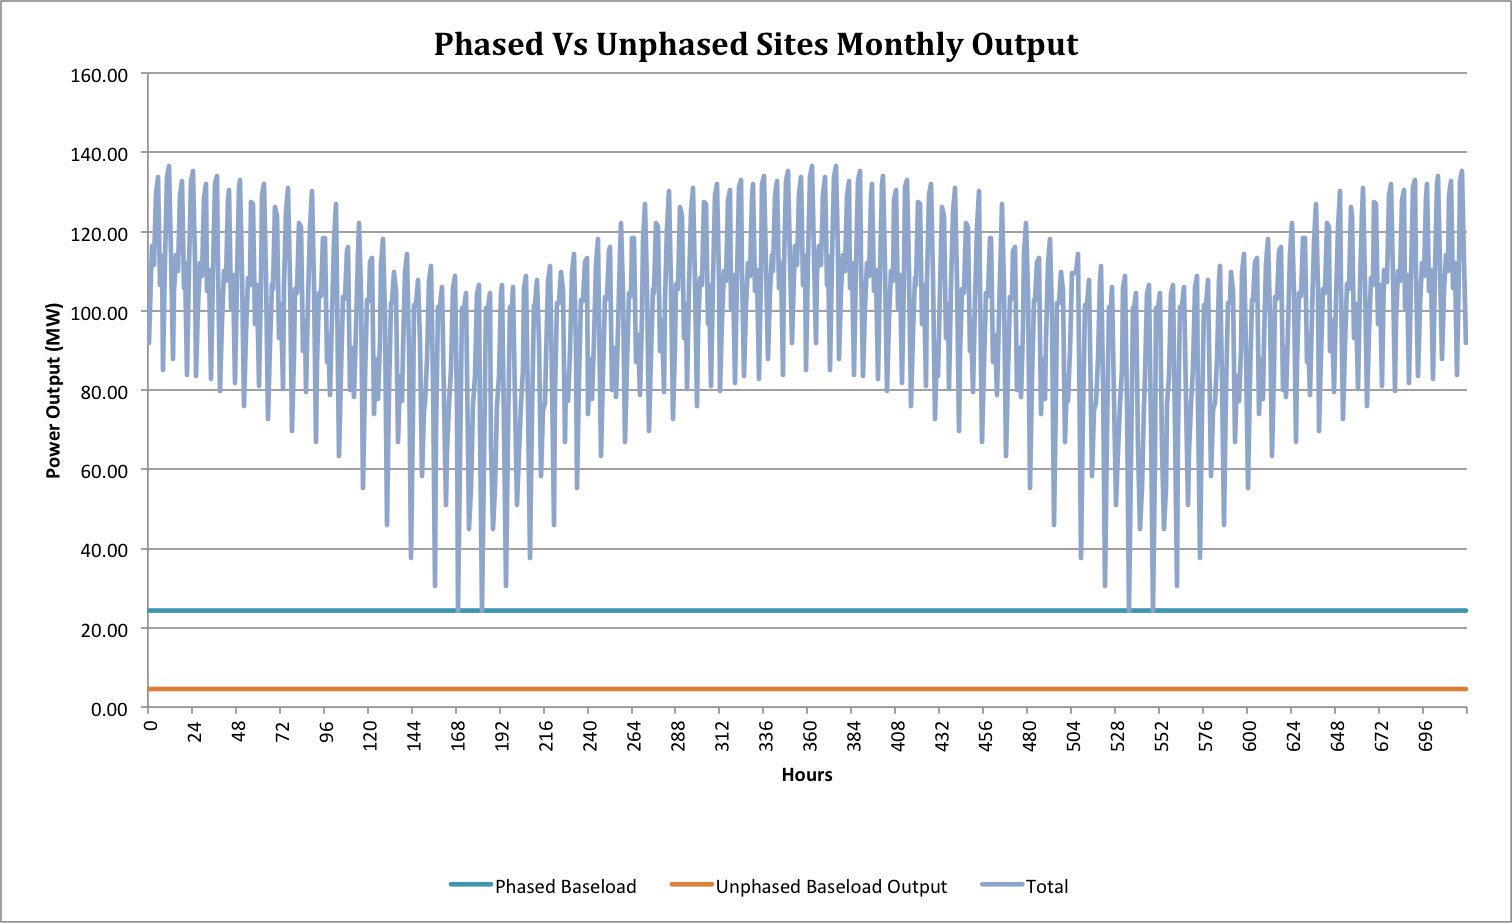 Phased Vs. Unphased Monthly Power Output